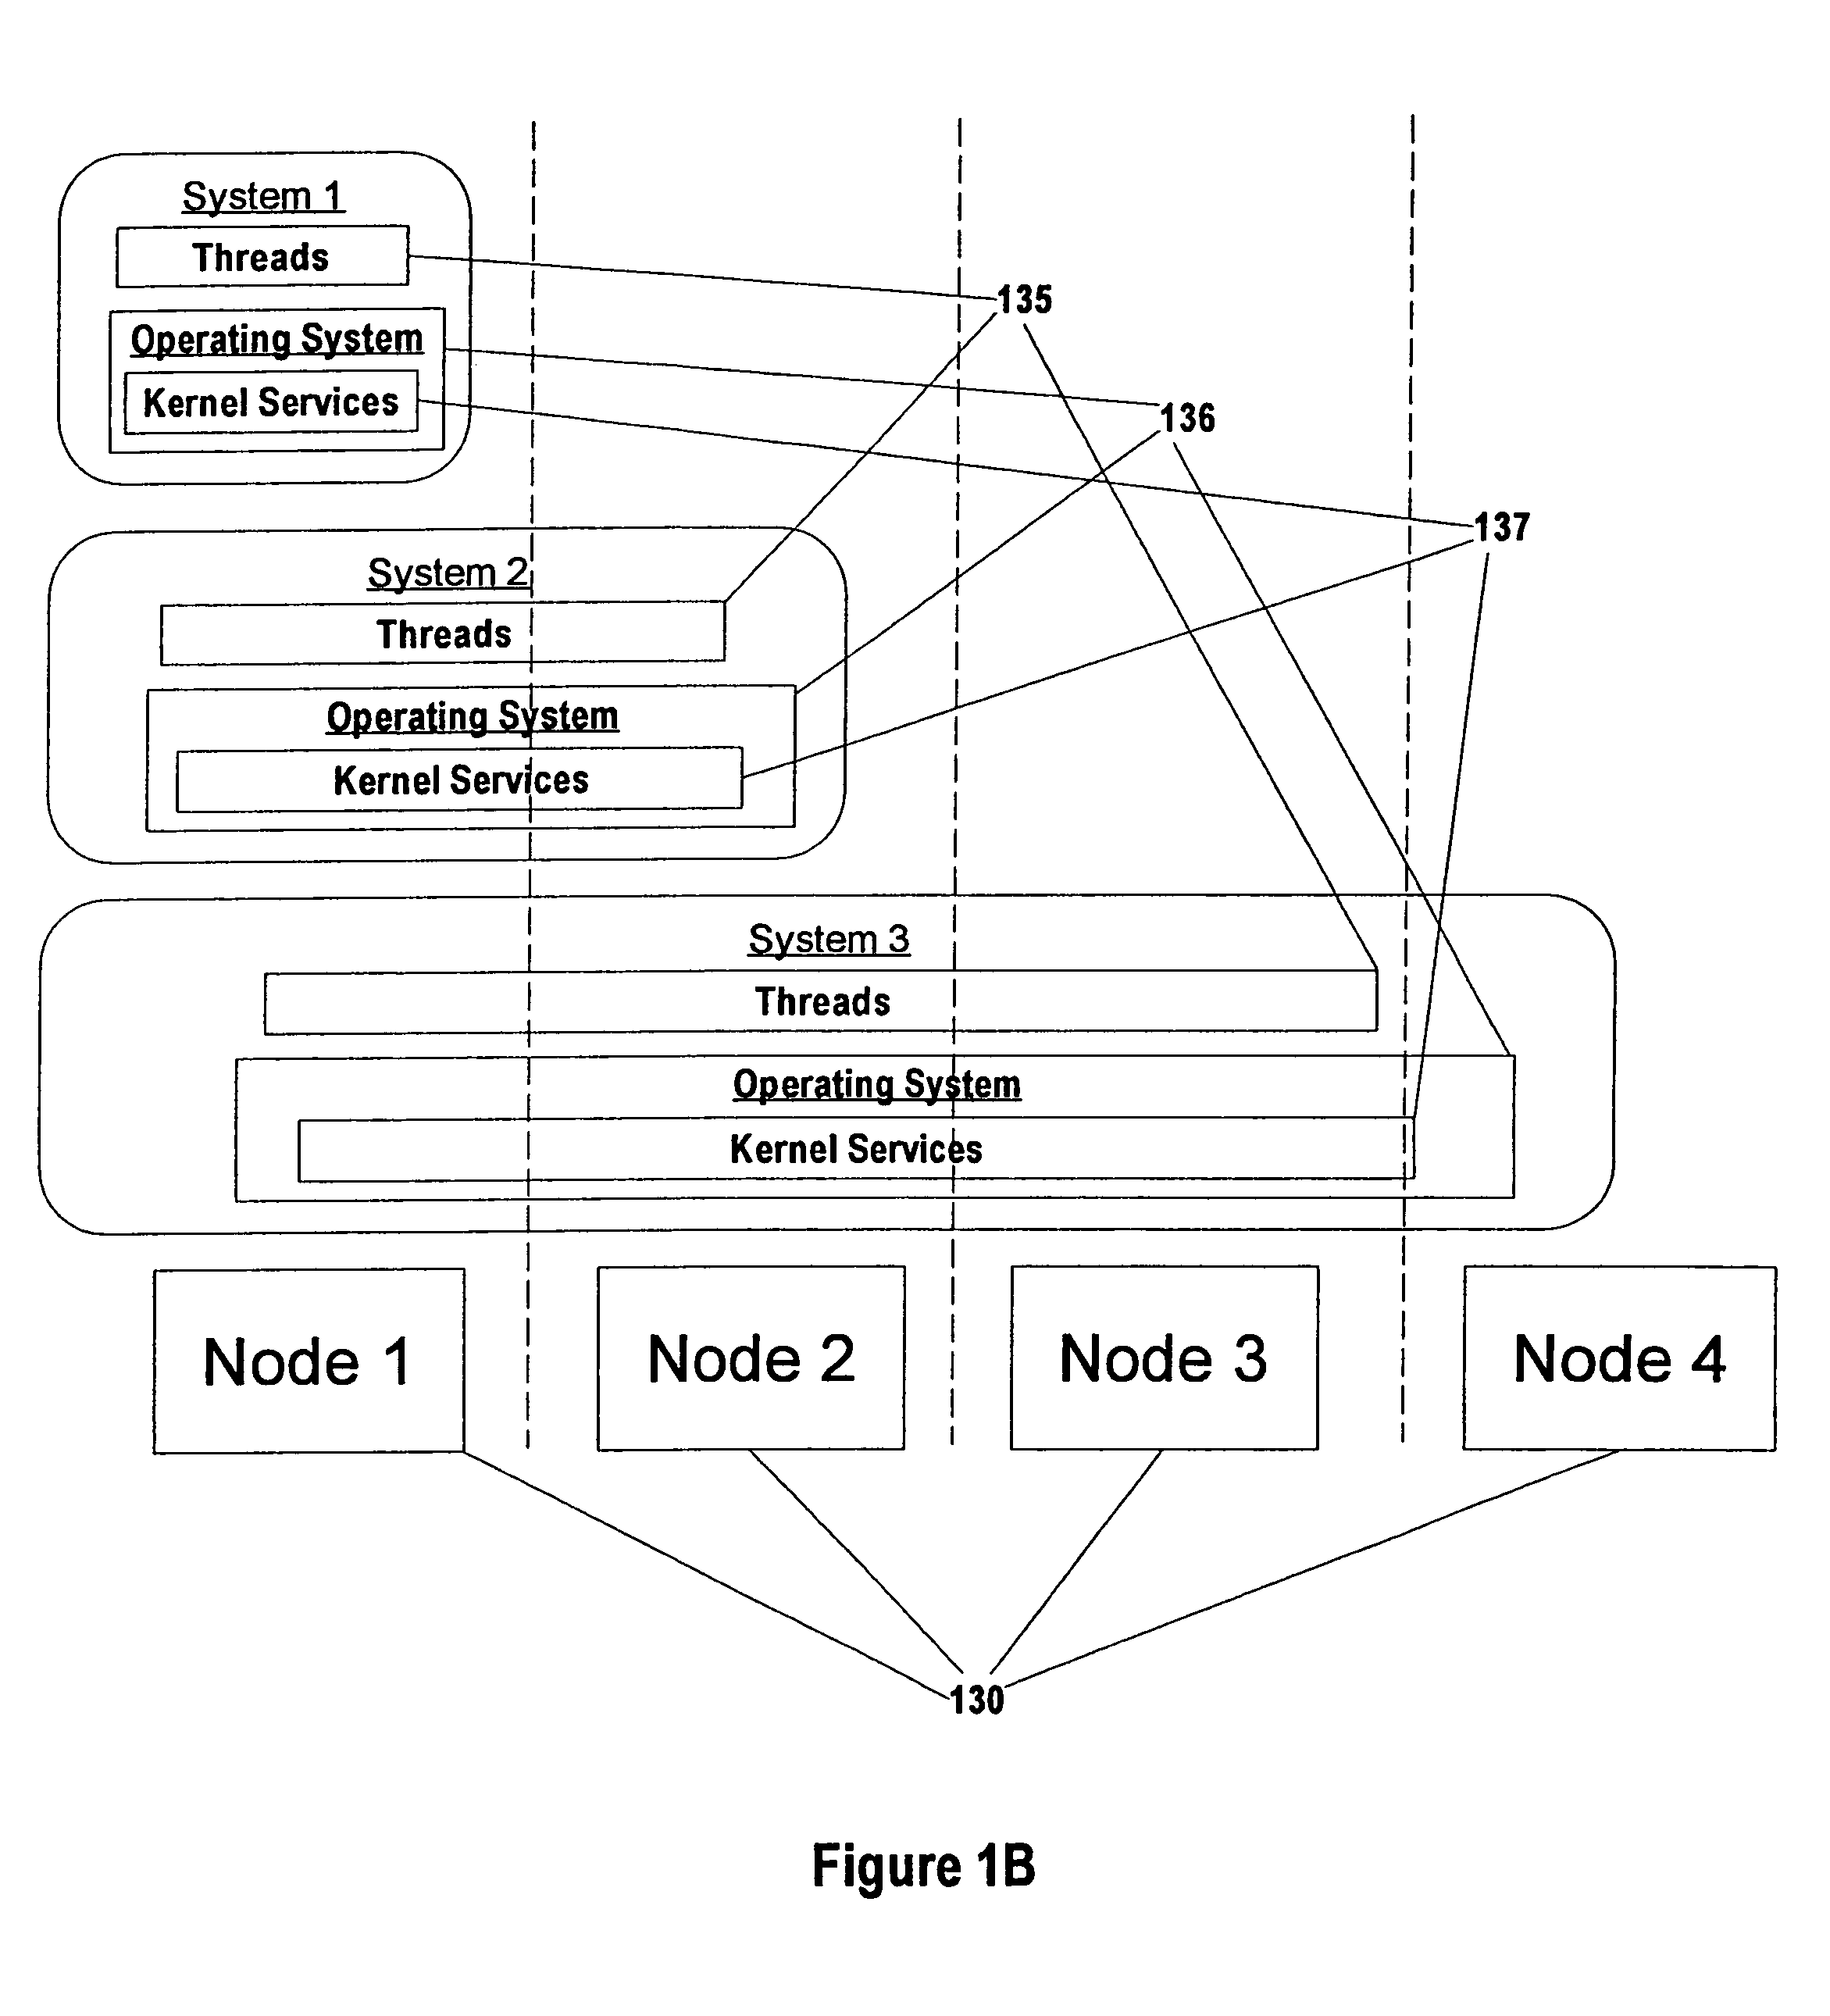 Mechanism for reducing remote memory accesses to shared data in a multi-nodal computer system